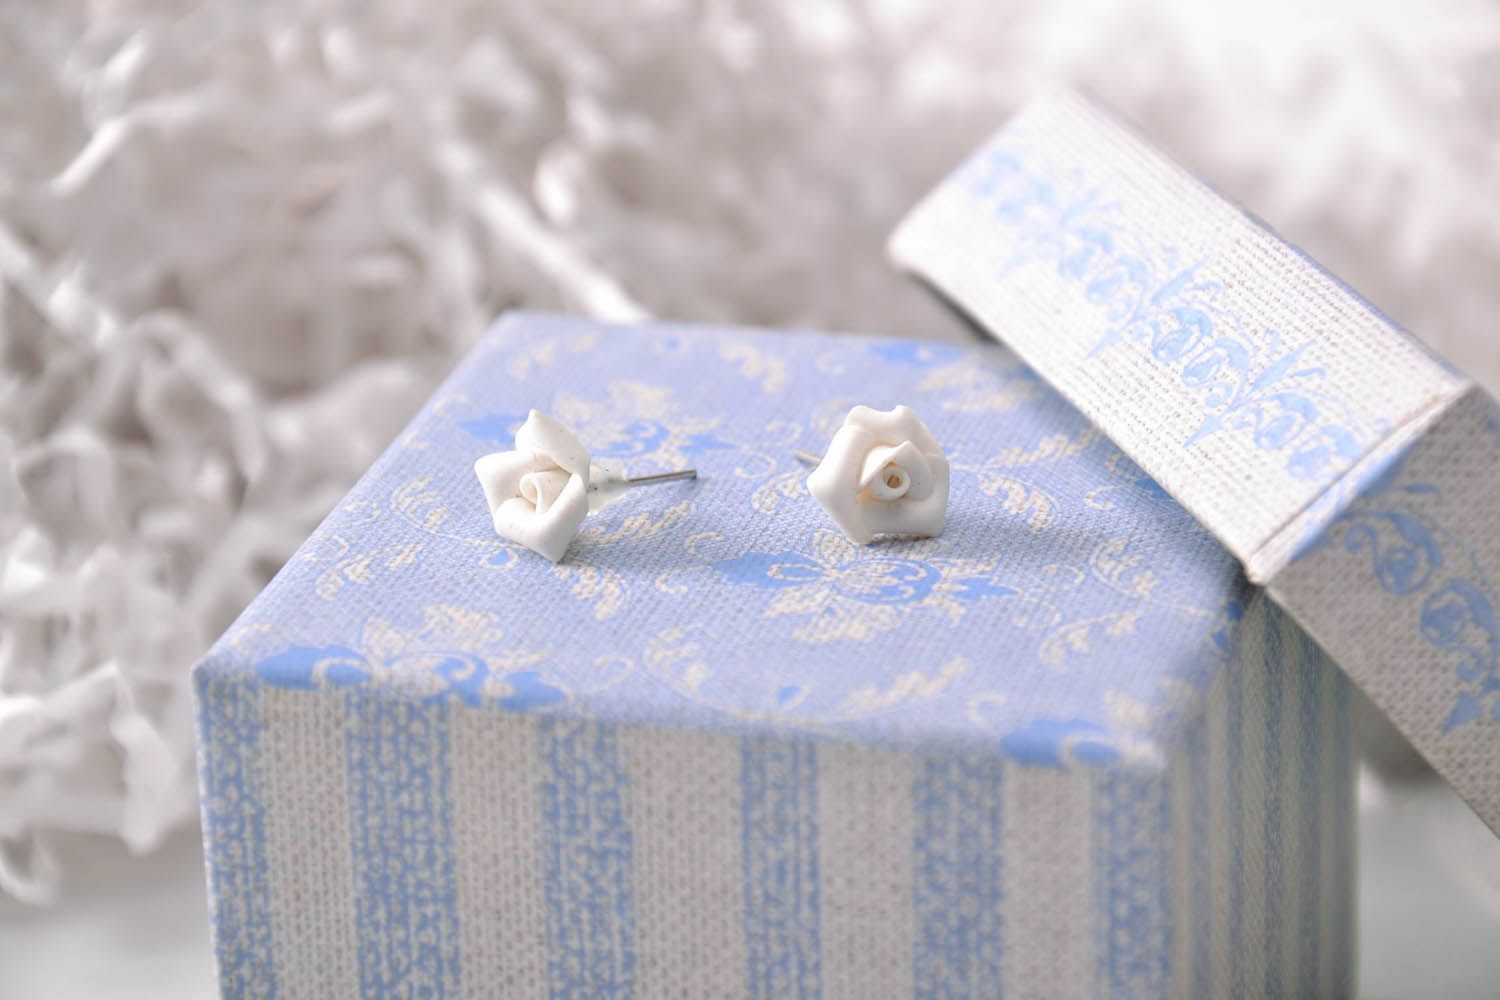 Stud earrings made of polymer clay photo 3